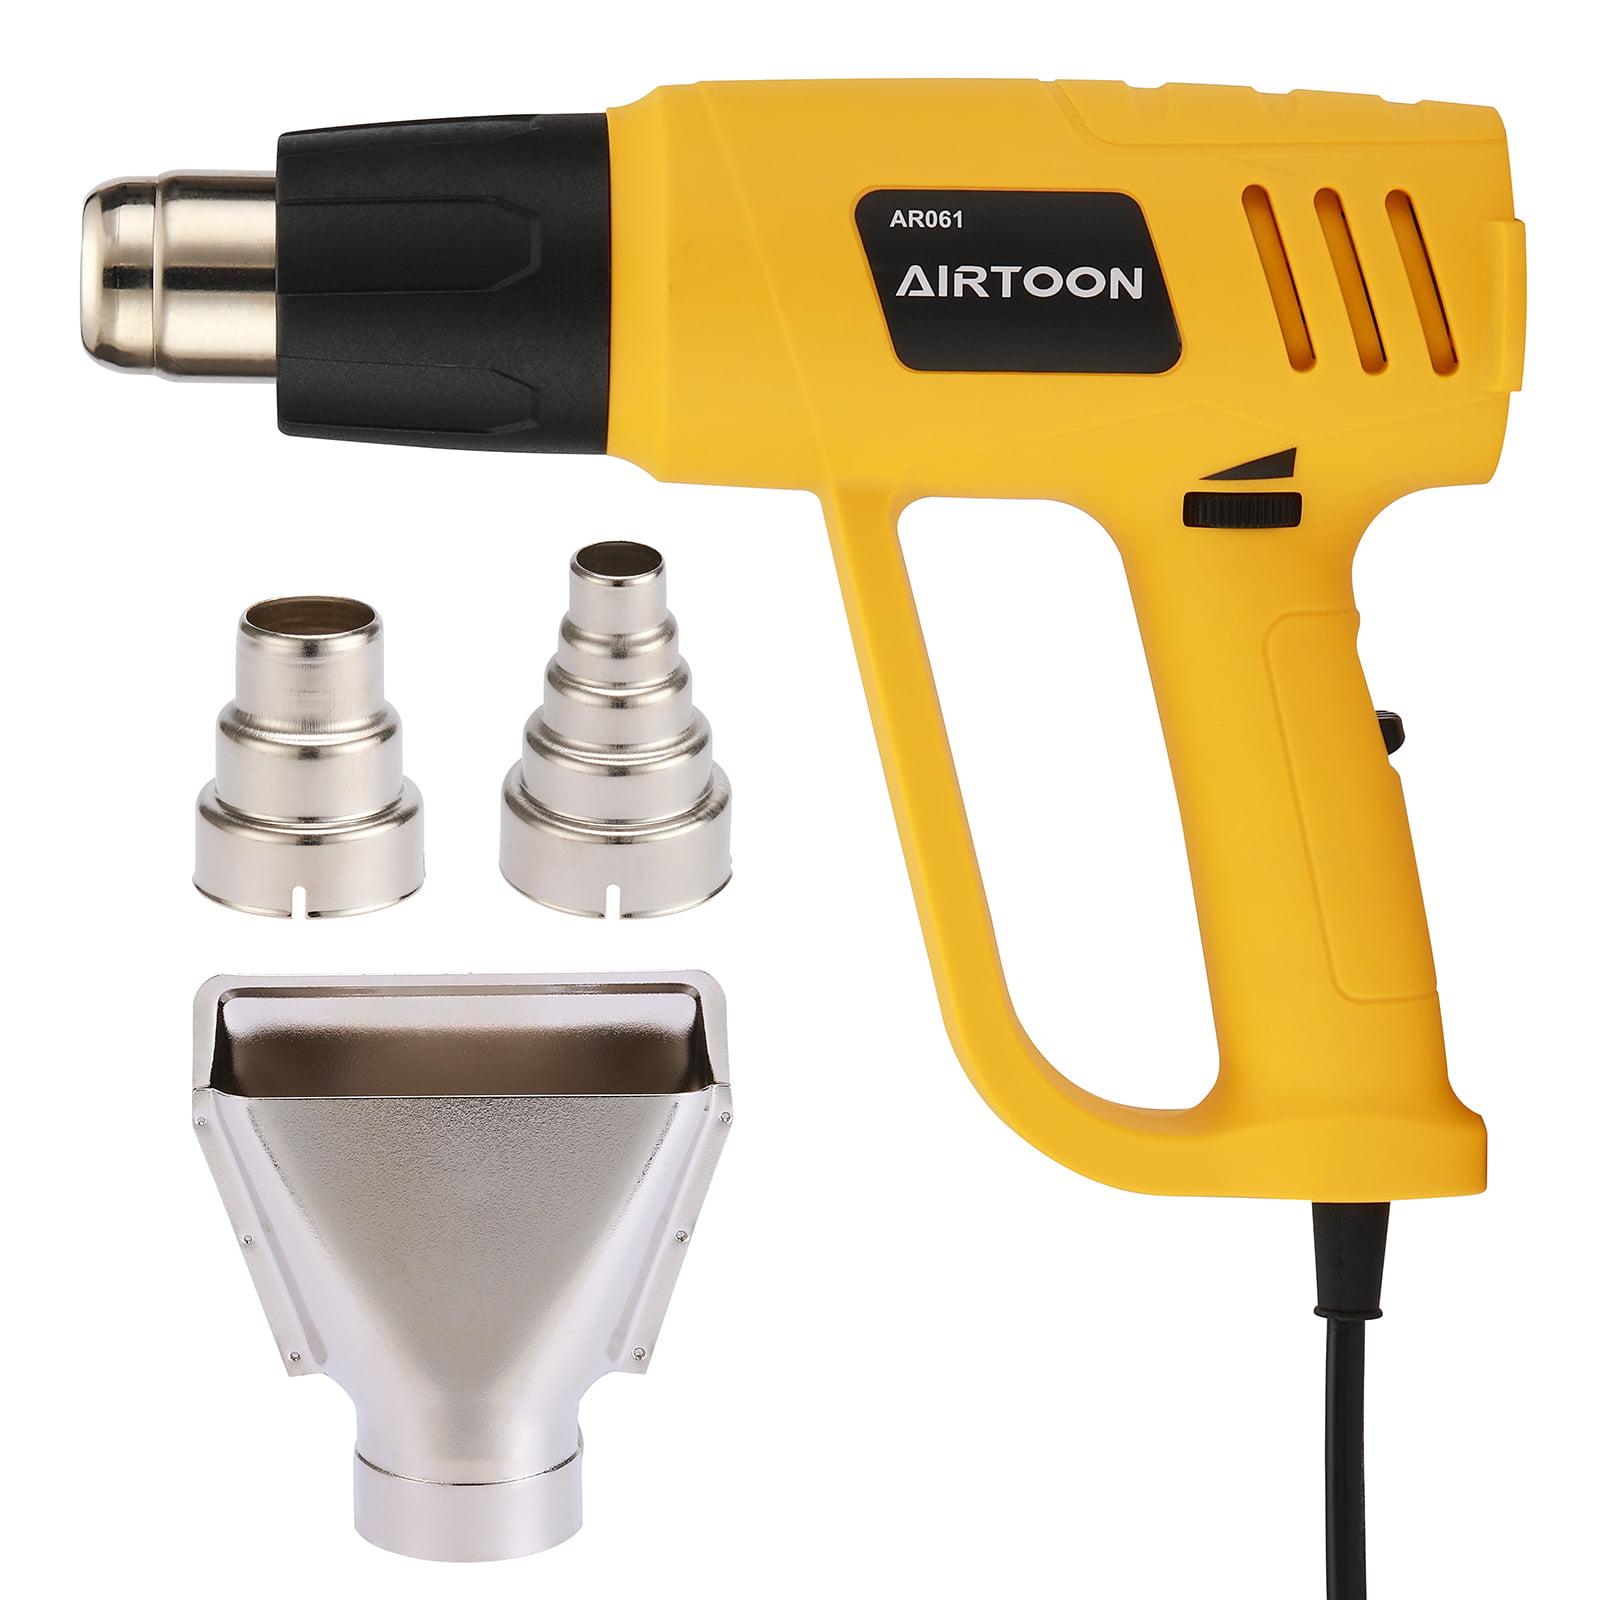 AIRTOON 2000W Heat Gun, Heavy Duty Soldering Hot Air Gun, Variable  Temperature Control with 2-Temp Settings 120°F~1094°F, 3 Nozzles for Shrink  Wrap, Soften Paint, Loosen Bolts and More 